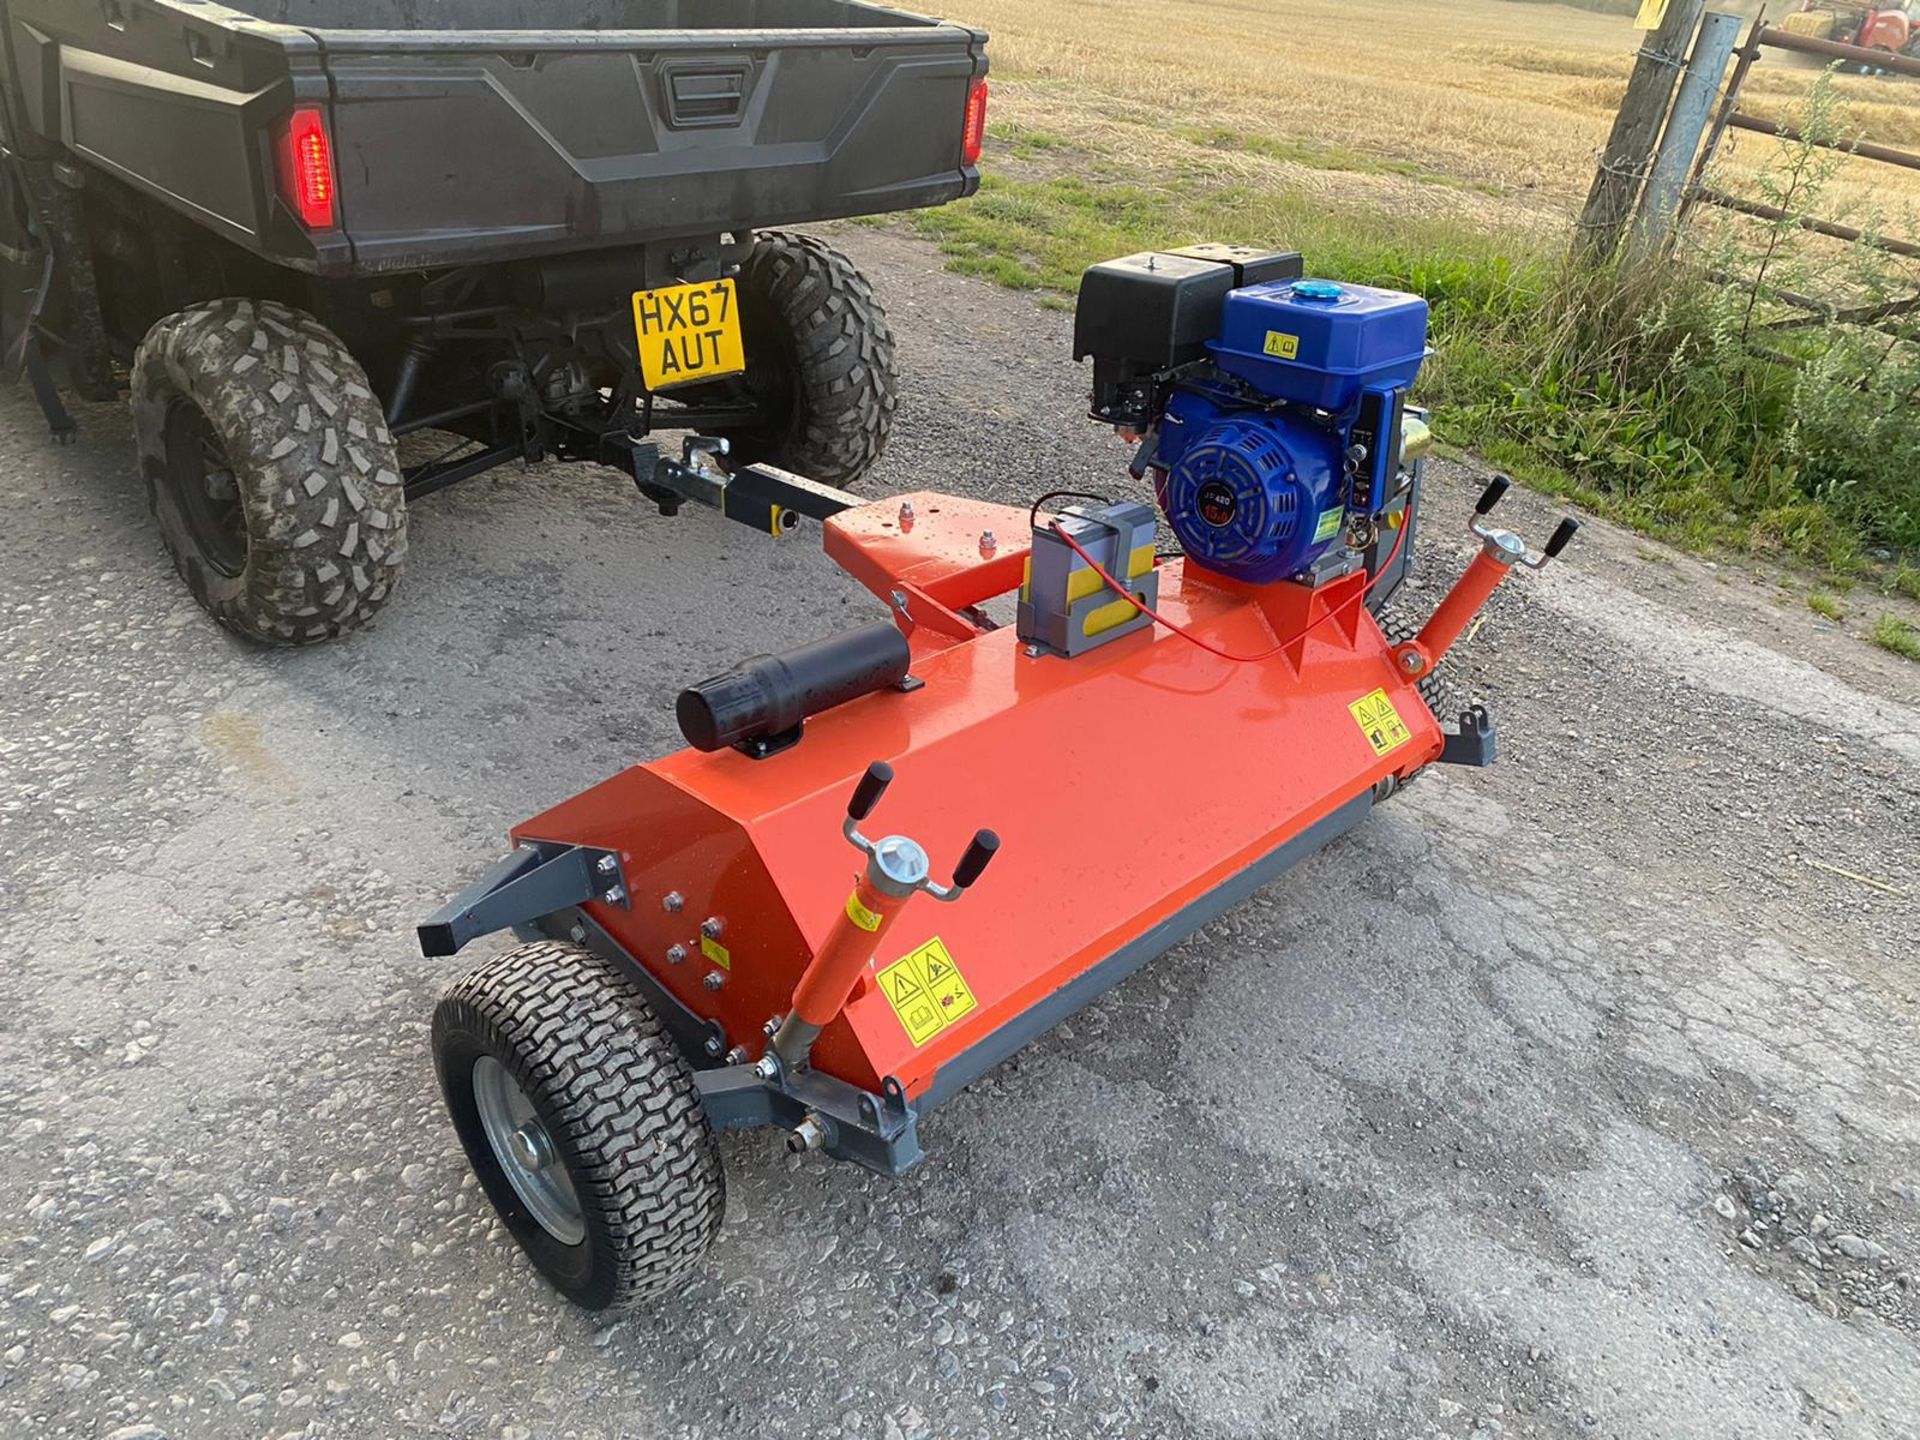 NEW AND UNUSED 1.2 METRE SINGLE AXLE FAST TOW FLAIL MOWER, SUITABLE FOR ATV / UTILITY VEHICLE - Image 2 of 8